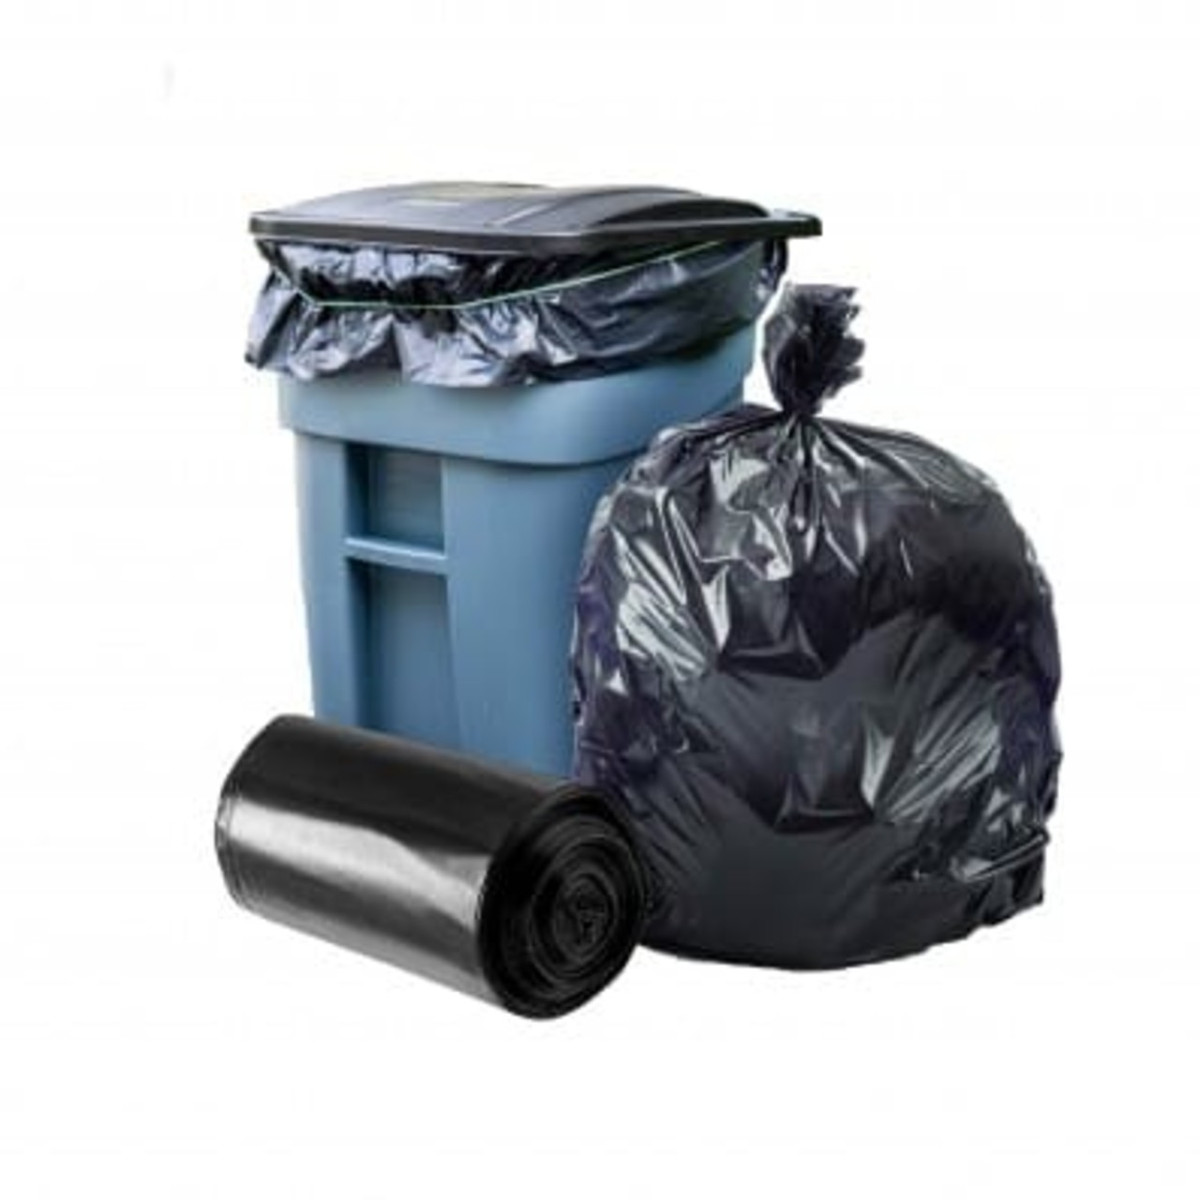 Dyno Products Online 65 Gallon Large, Heavy Duty Trash Bags, 1.5 Mil Black - 50 Count - Individually Folded 50W x 48L